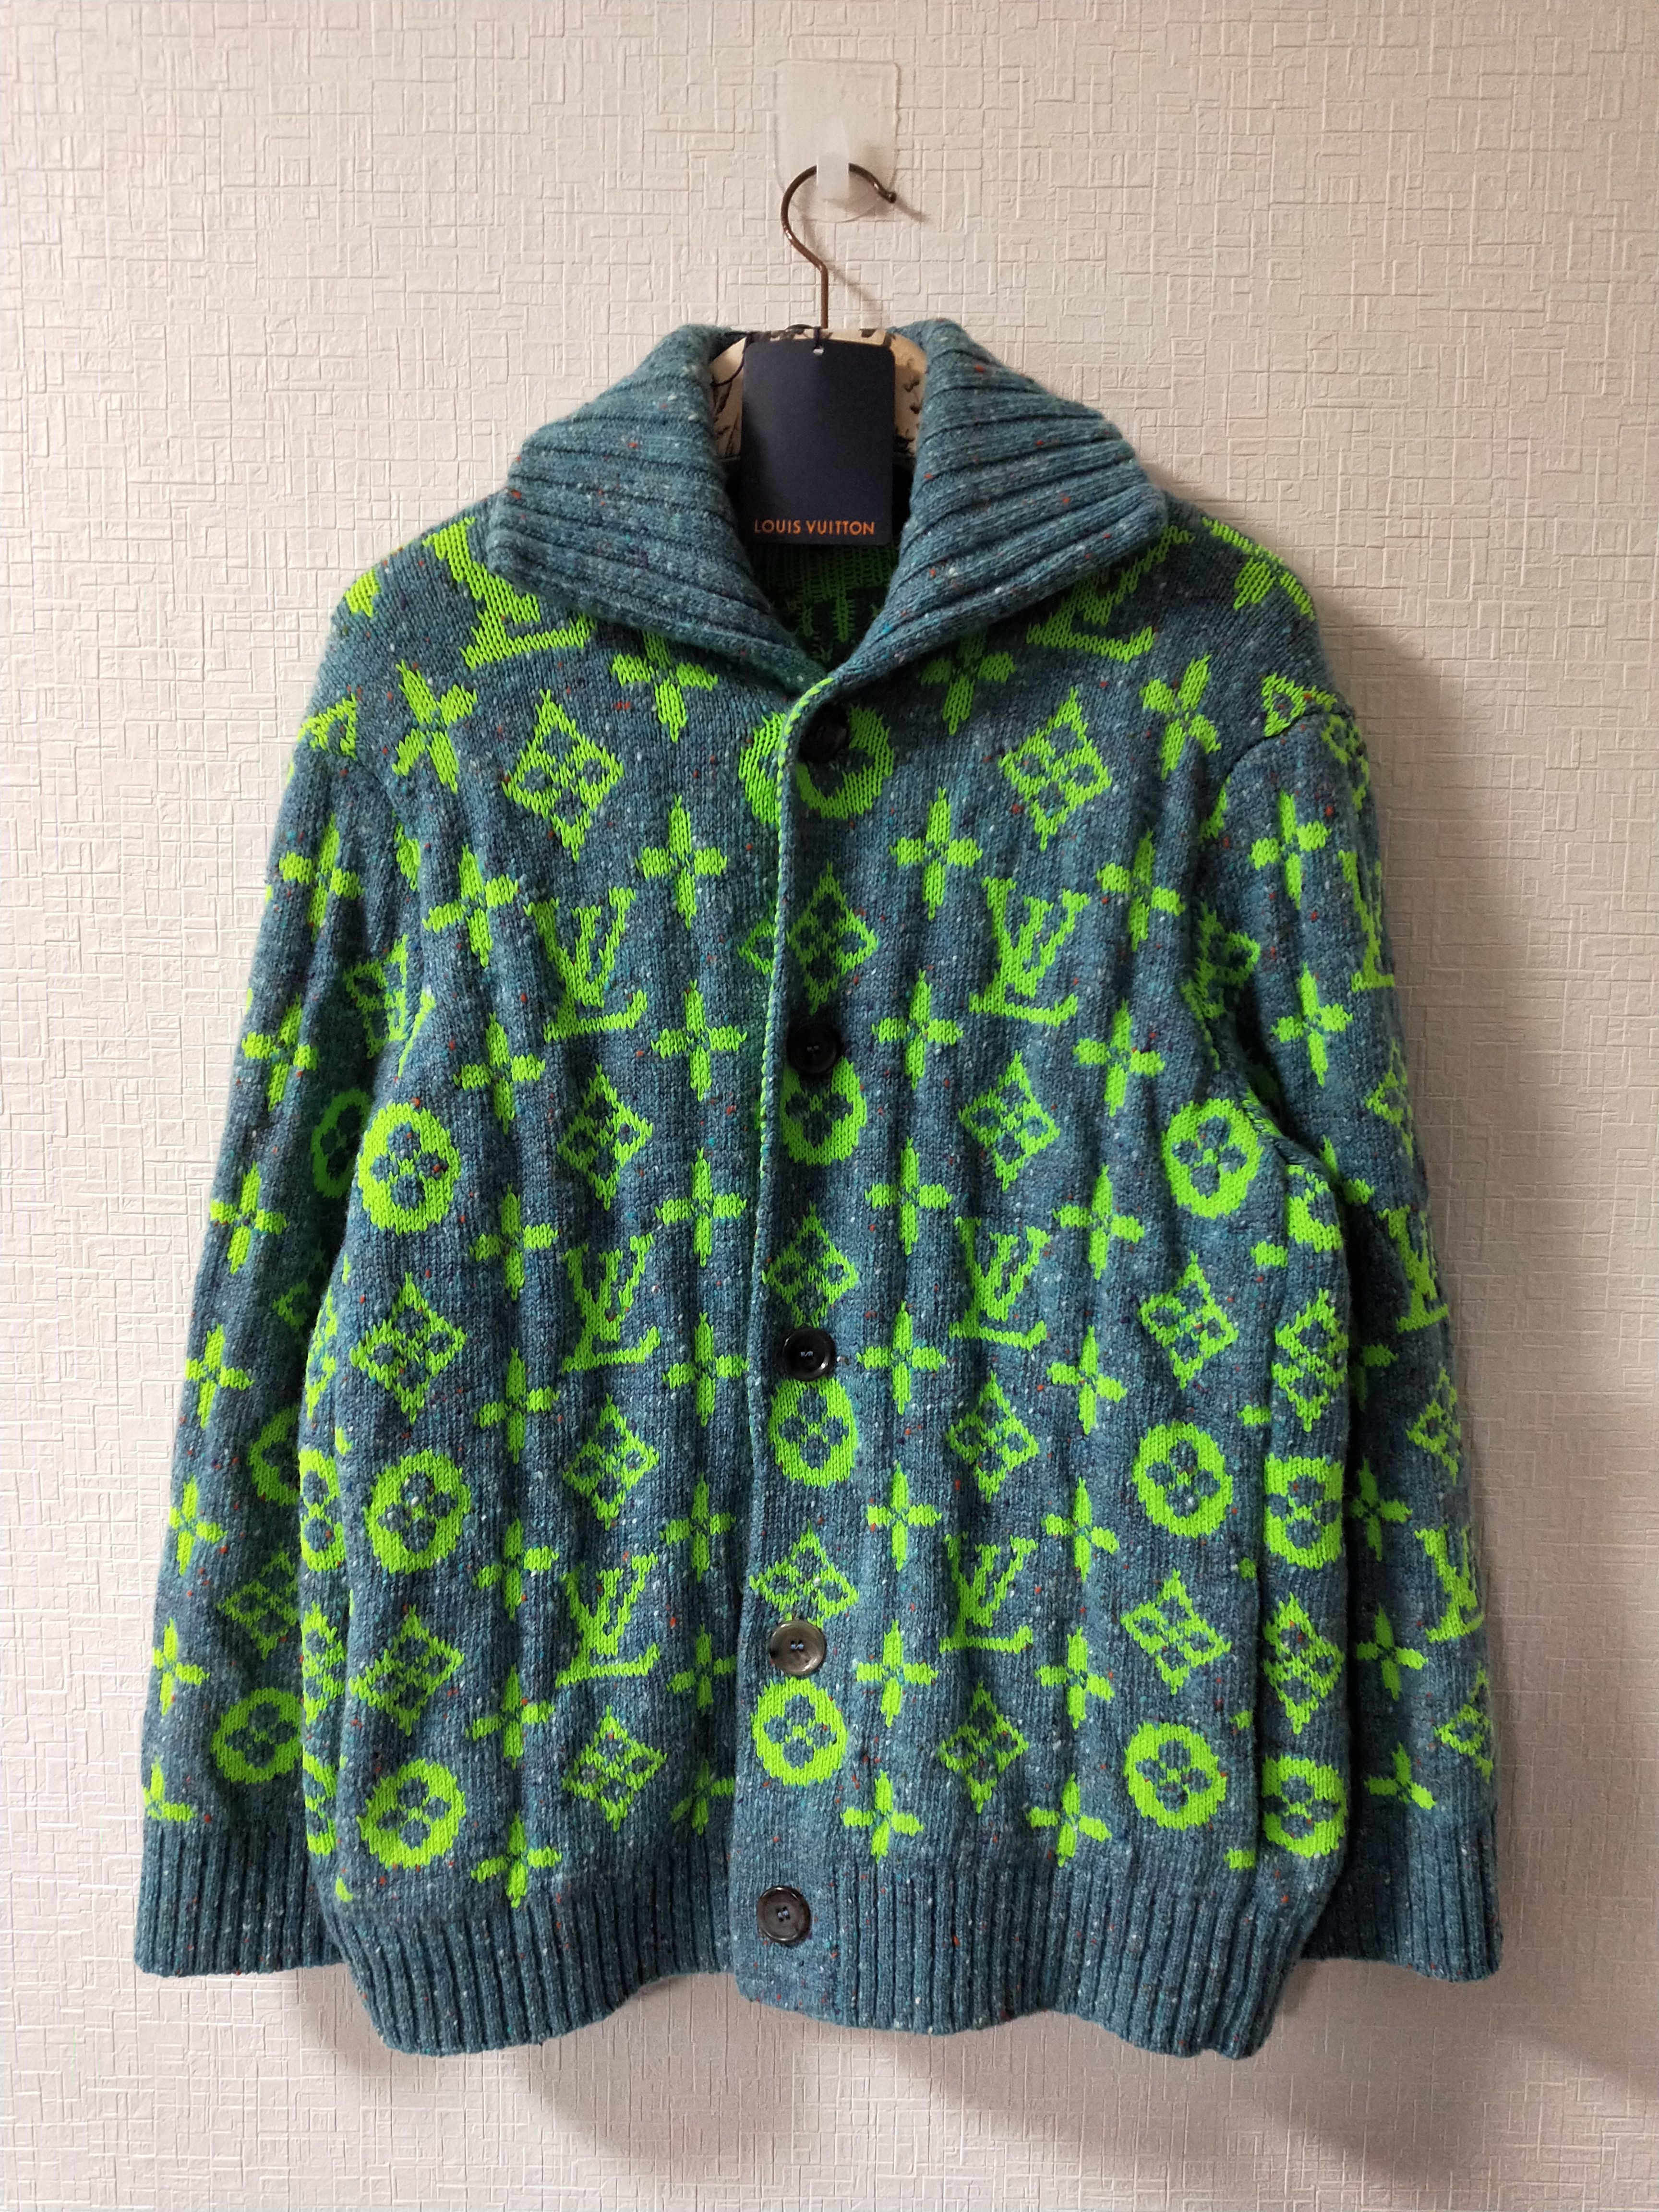 LOUIS VUITTON Gradient Knit Sweater/ tops L Green Japan Used